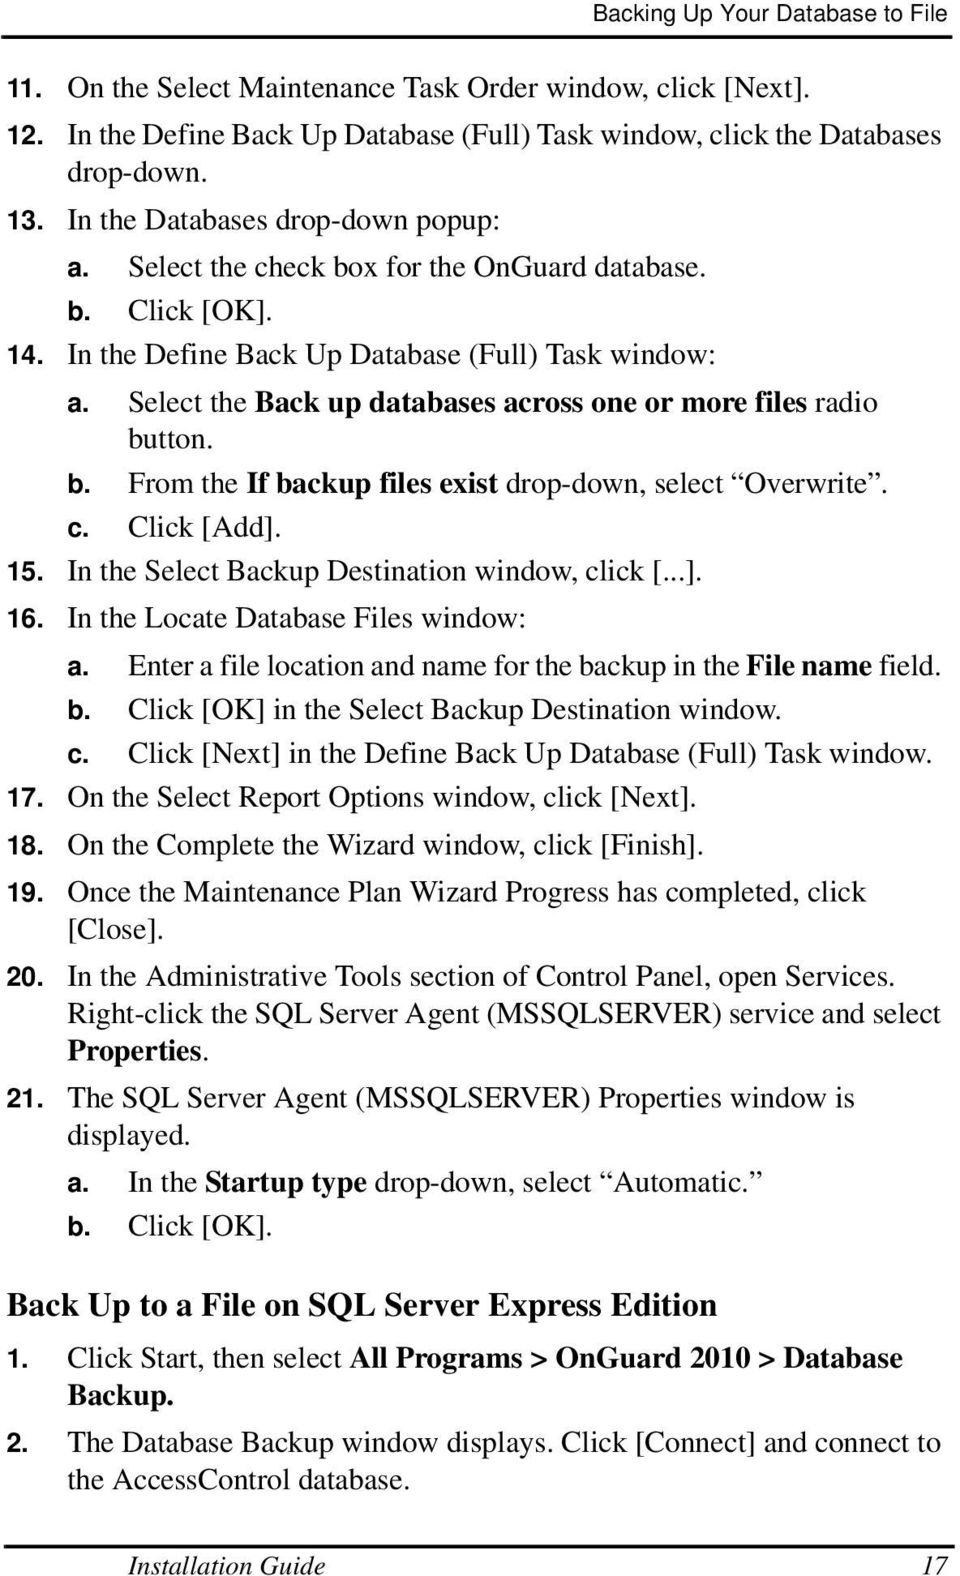 Select the Back up databases across one or more files radio button. b. From the If backup files exist drop-down, select Overwrite. c. Click [Add]. 15. In the Select Backup Destination window, click [.